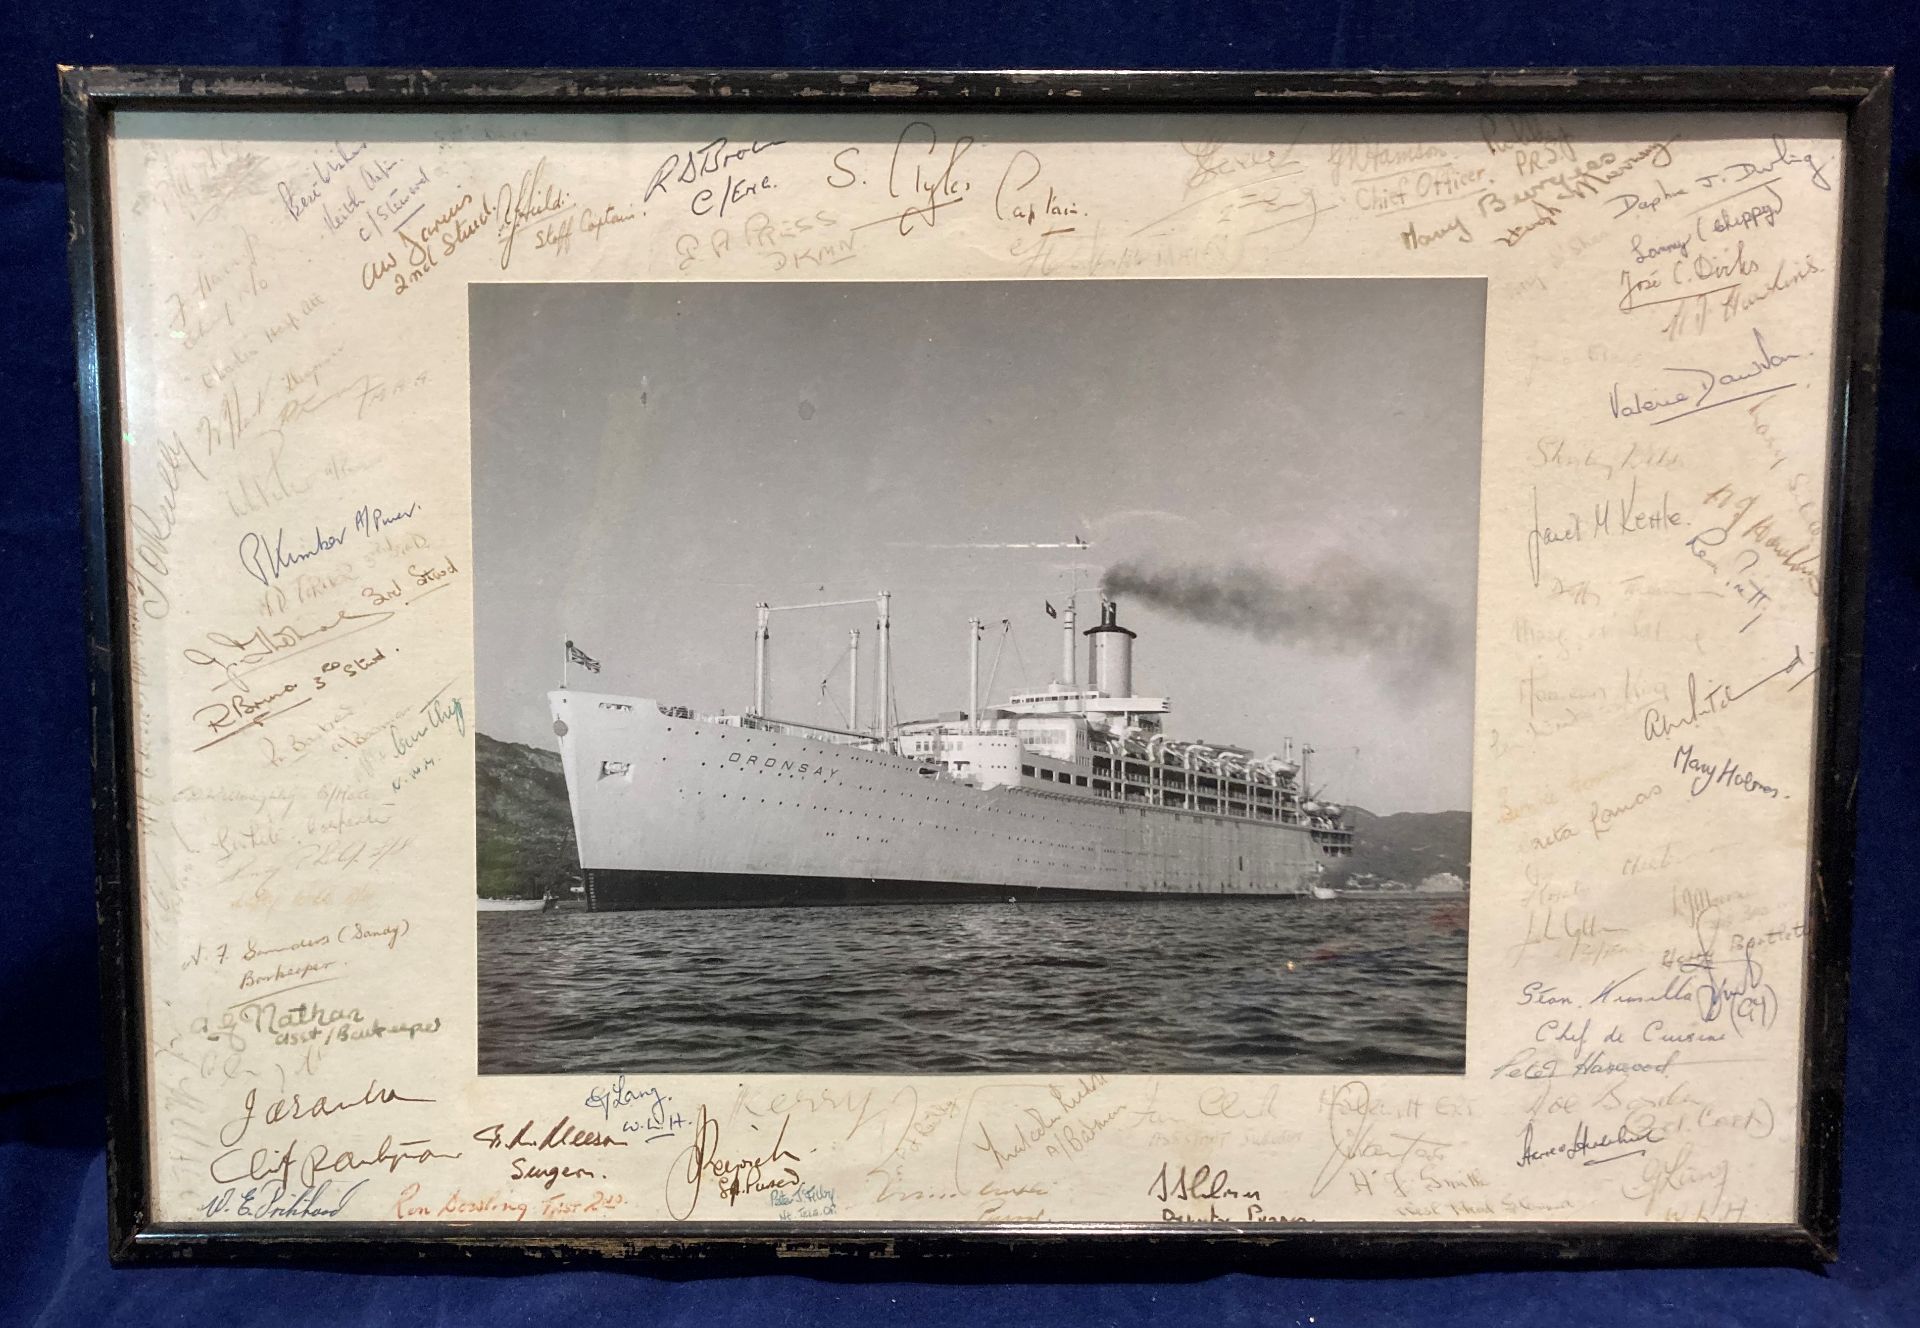 A framed photograph of the ship Oronsay with crew members signatures to the margin (Saleroom